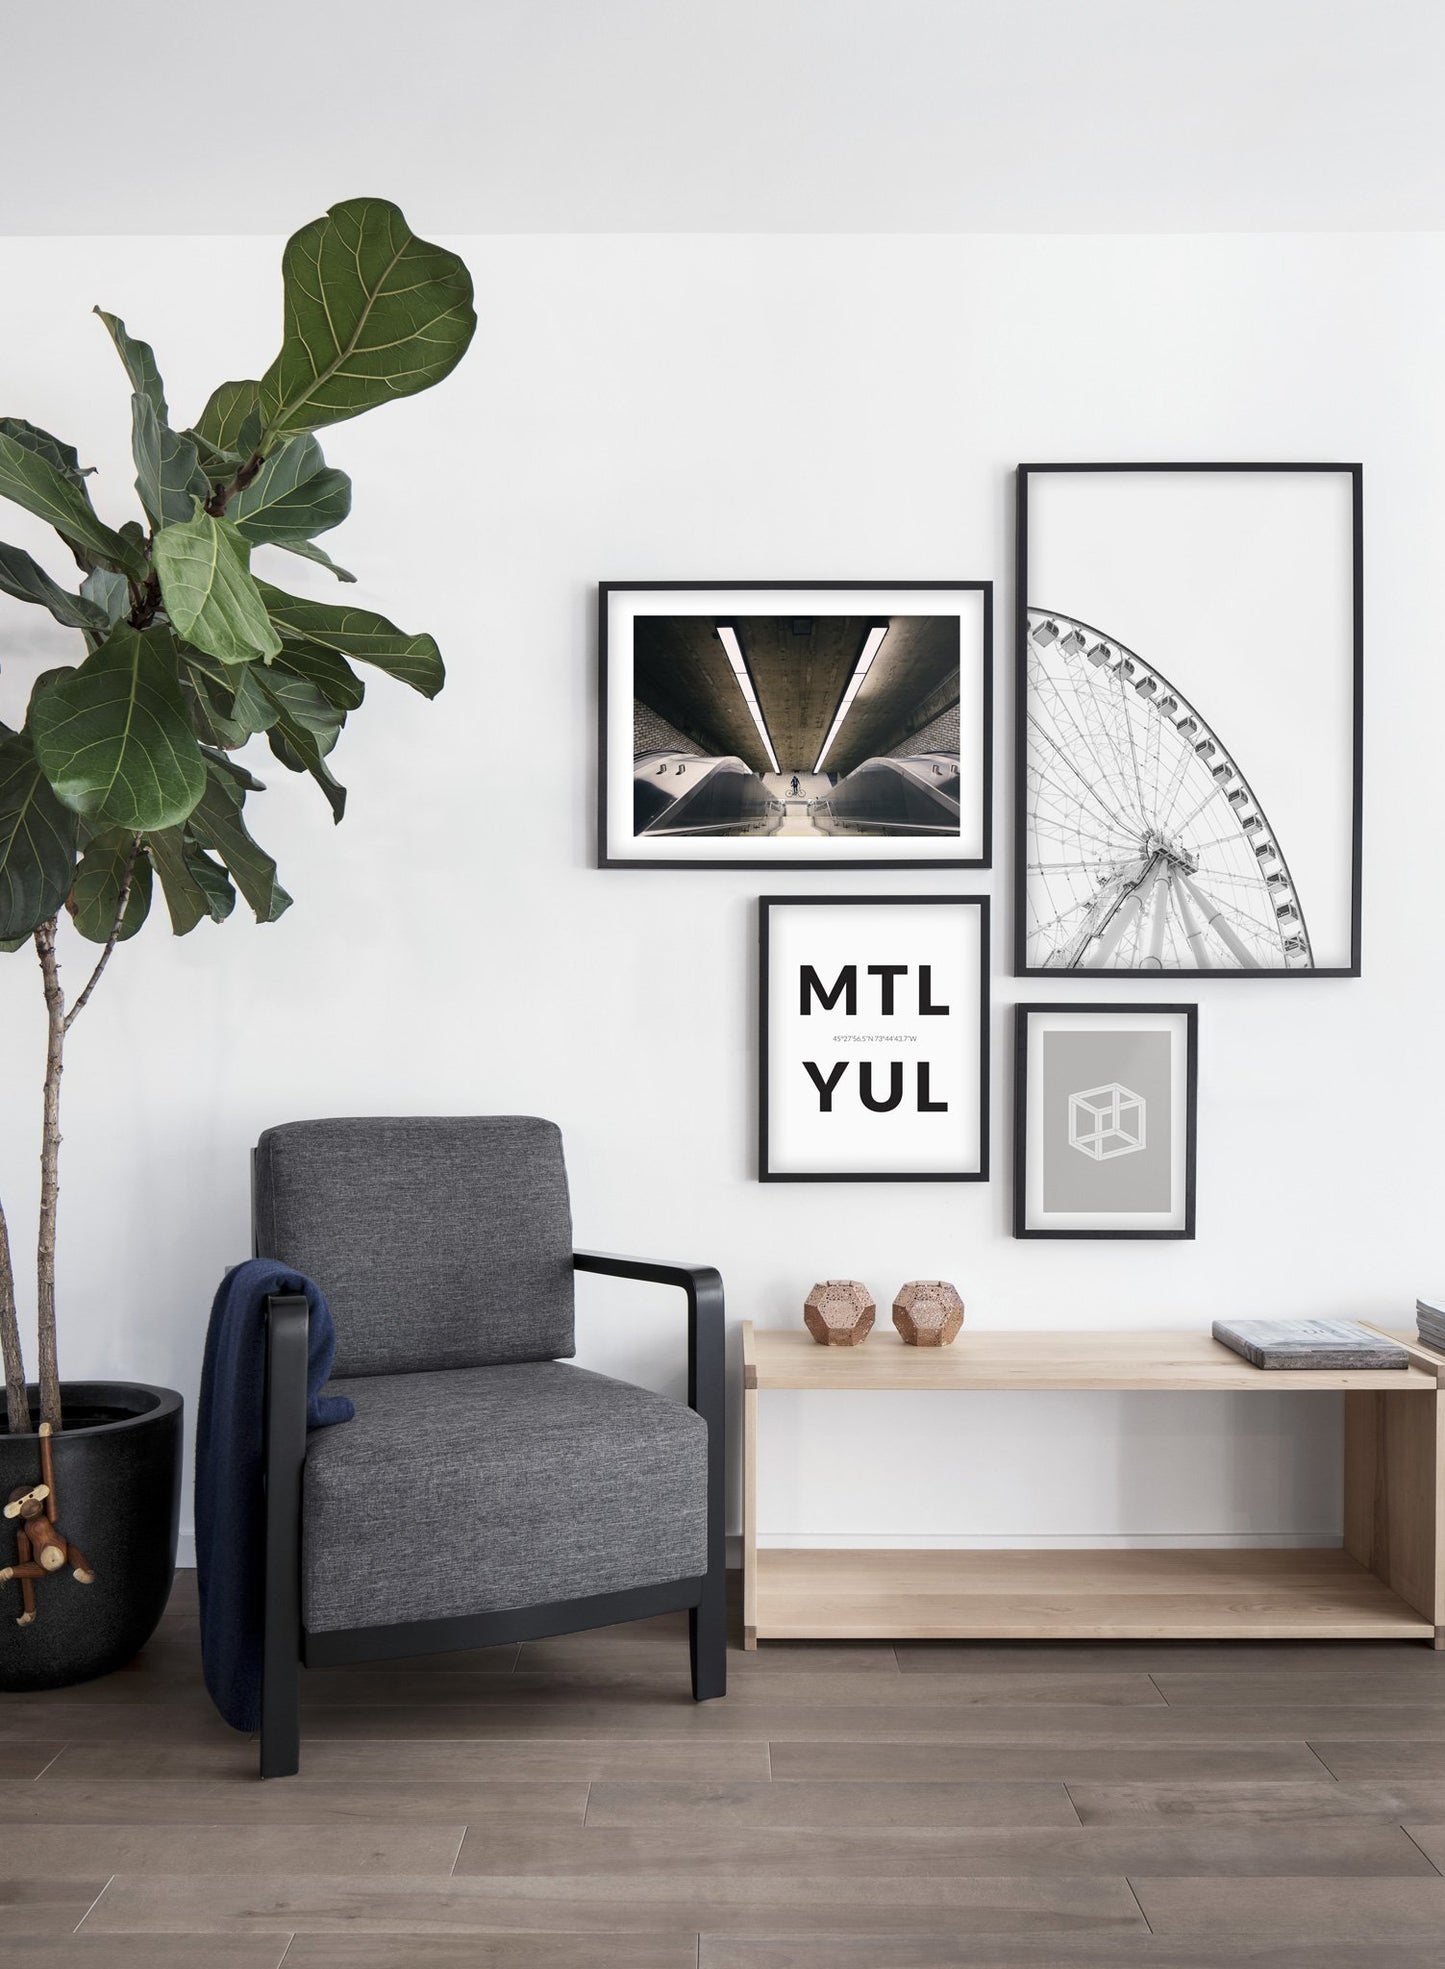 Grande Roue de Montreal modern minimalist photography poster by Opposite Wall - Living room